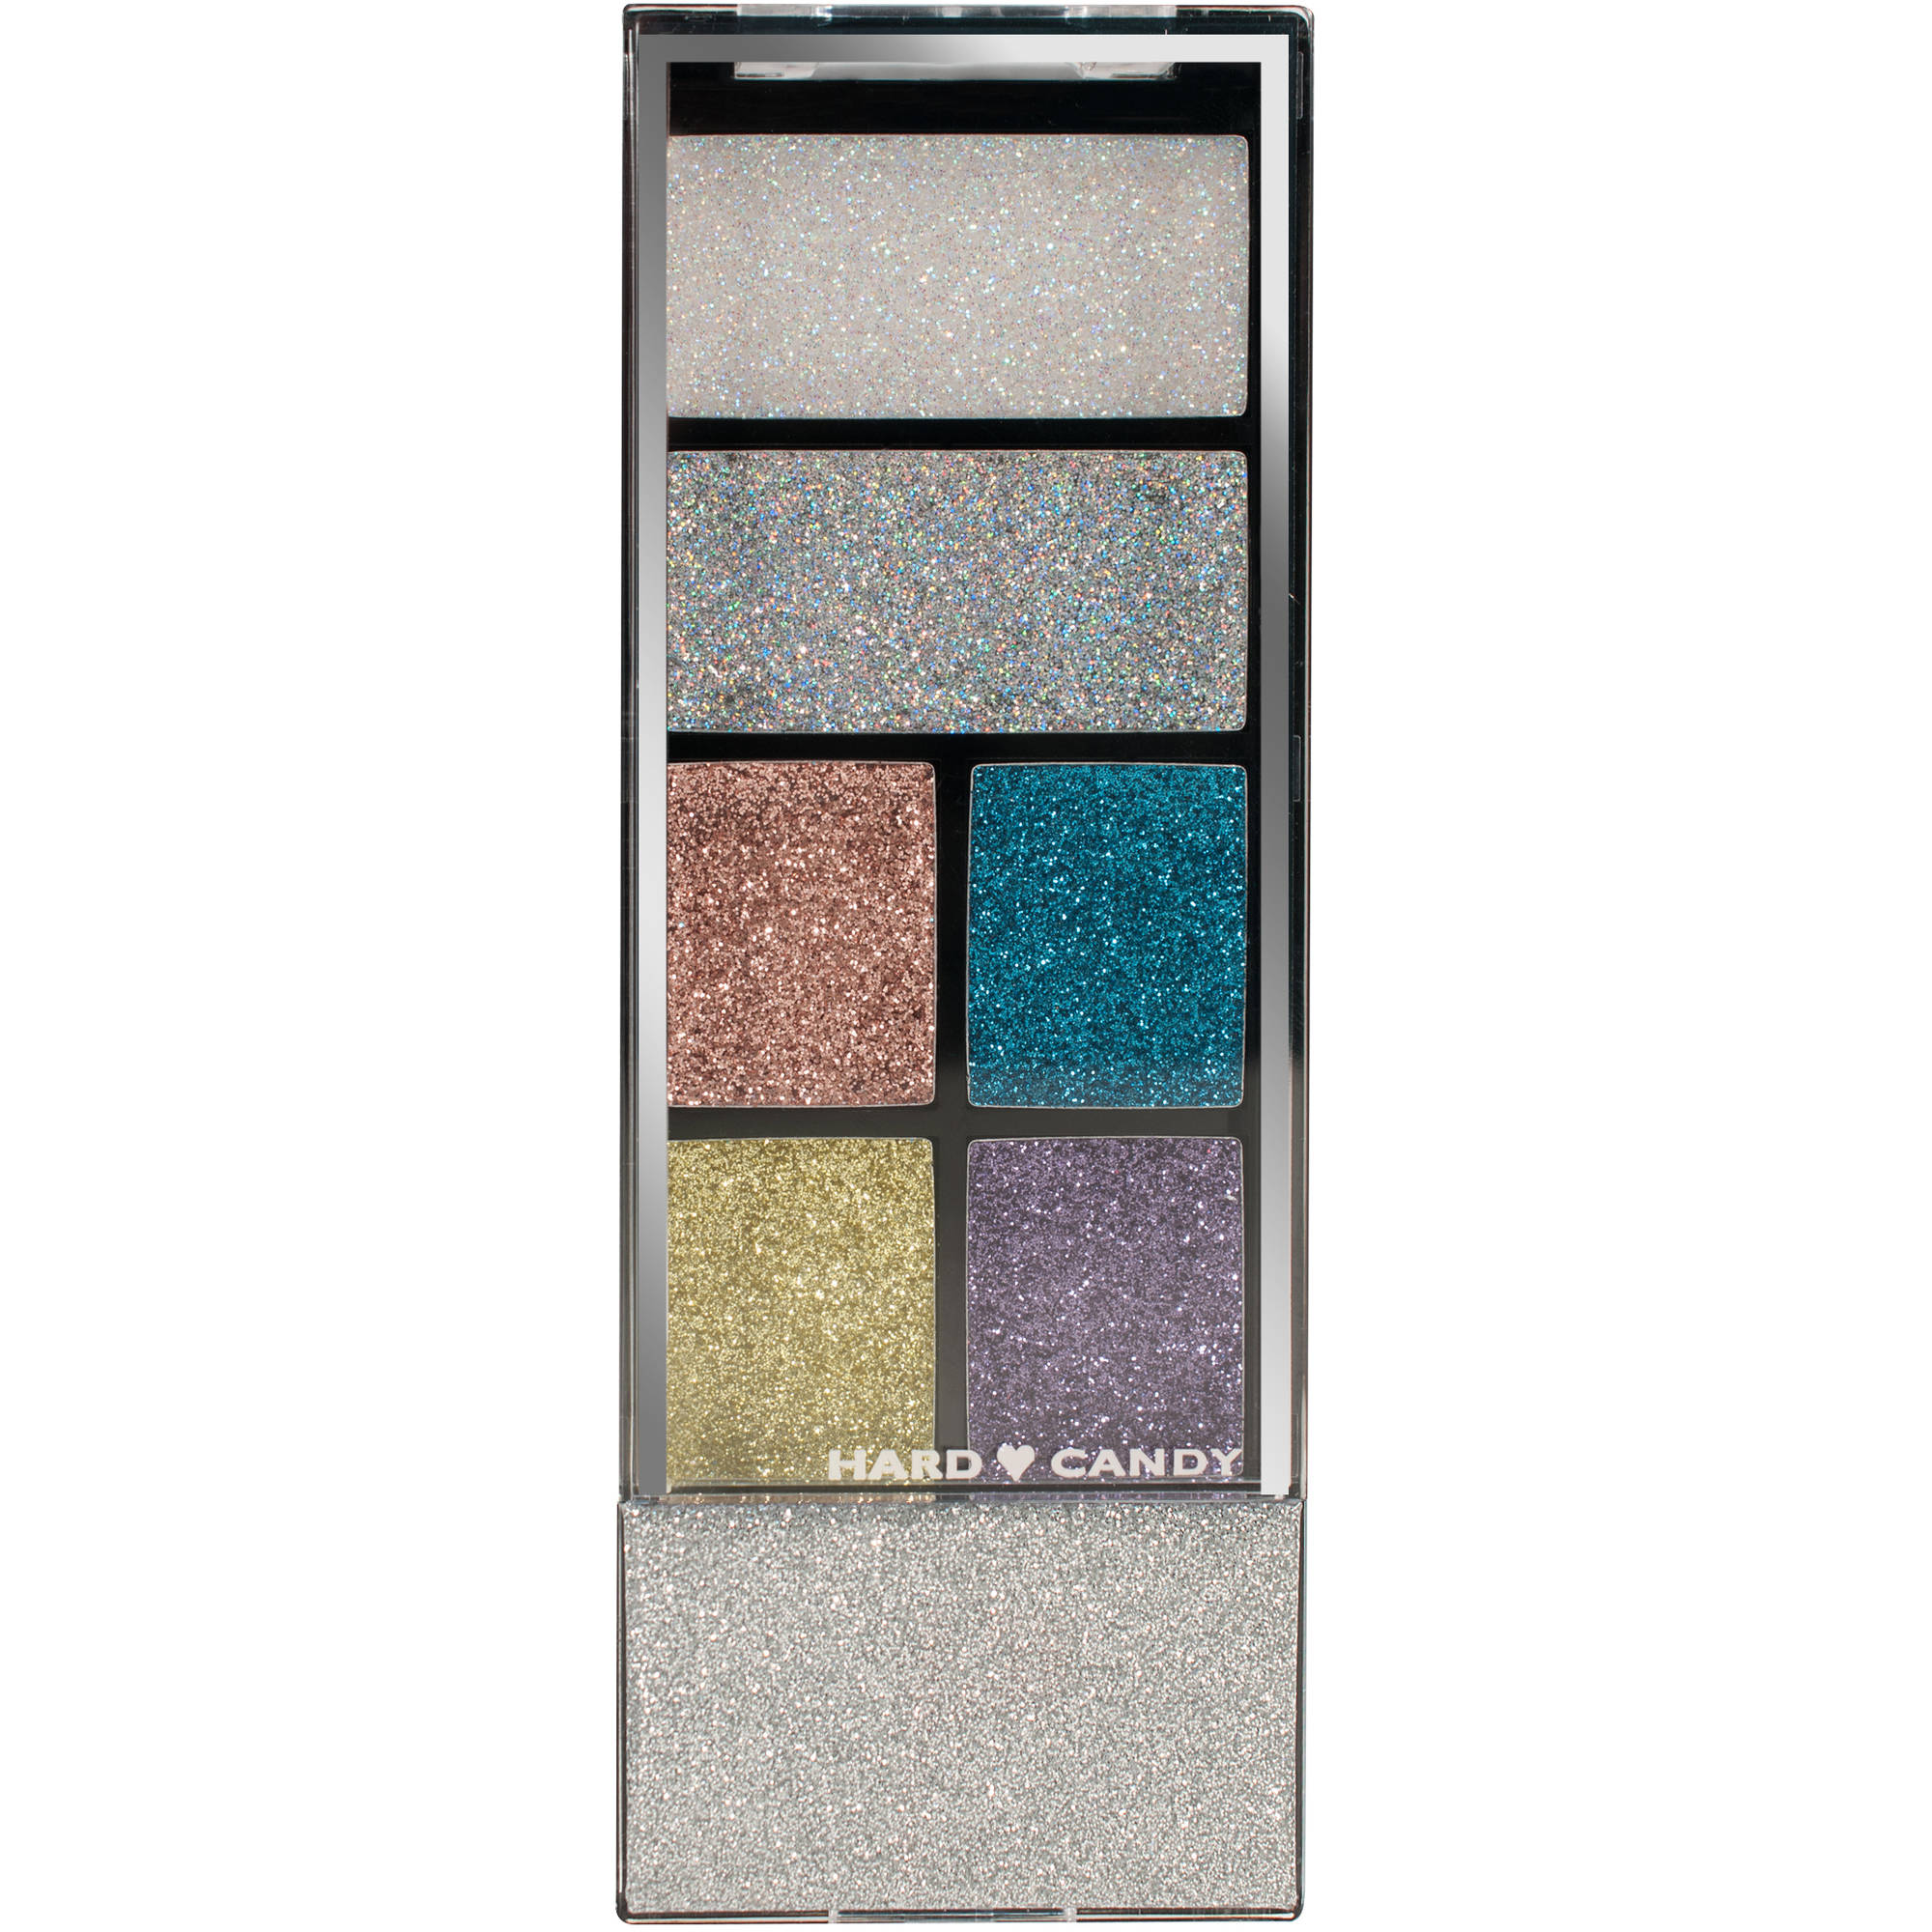 Hard Candy Glitteratzi Compact Eye Shadow, Call Me Sparkles, 5.63 oz - image 1 of 3